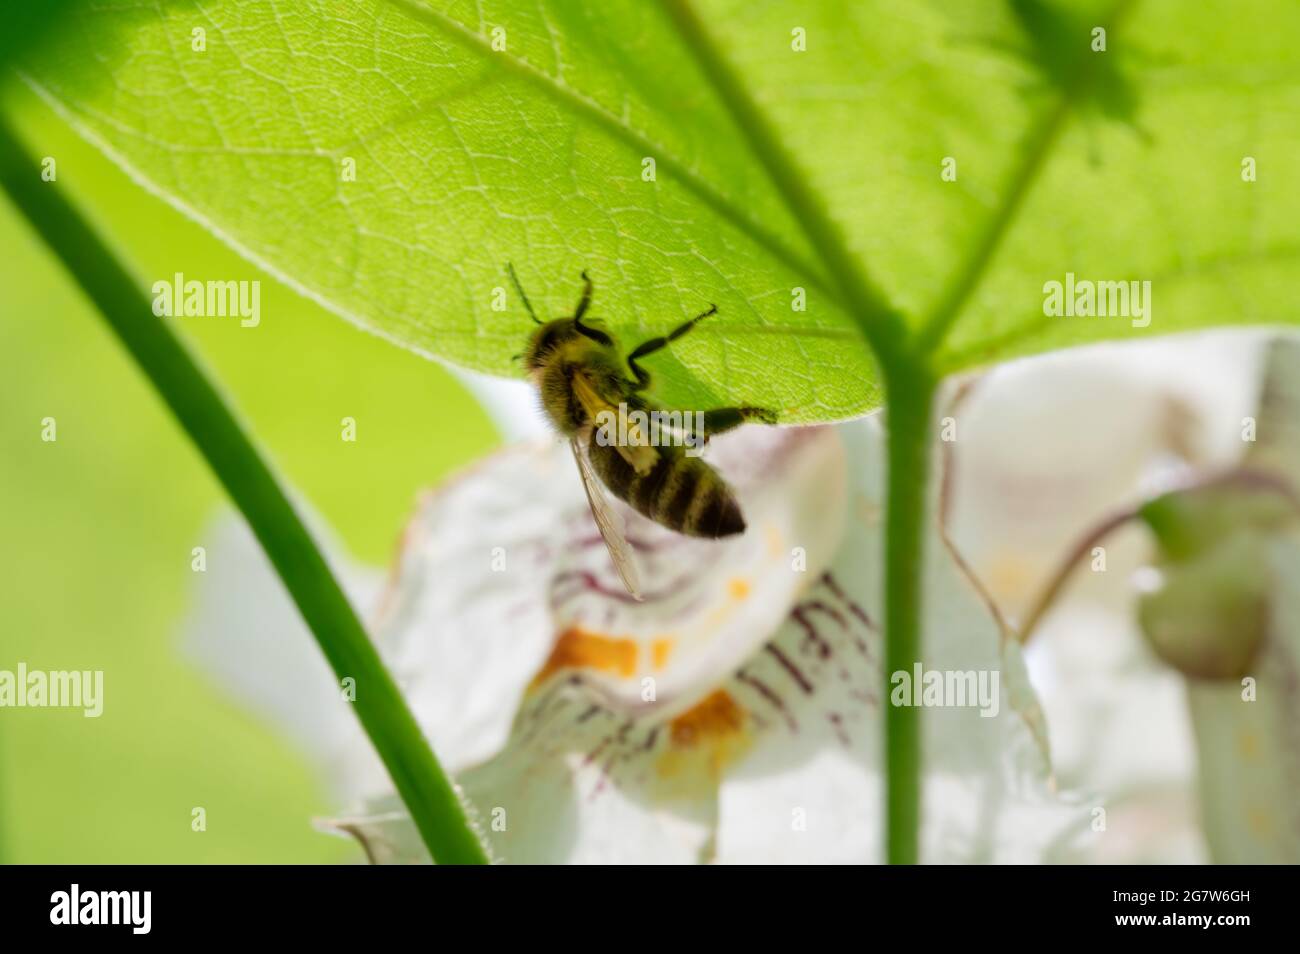 Honey Bee on Back of Green Leaf Stock Photo